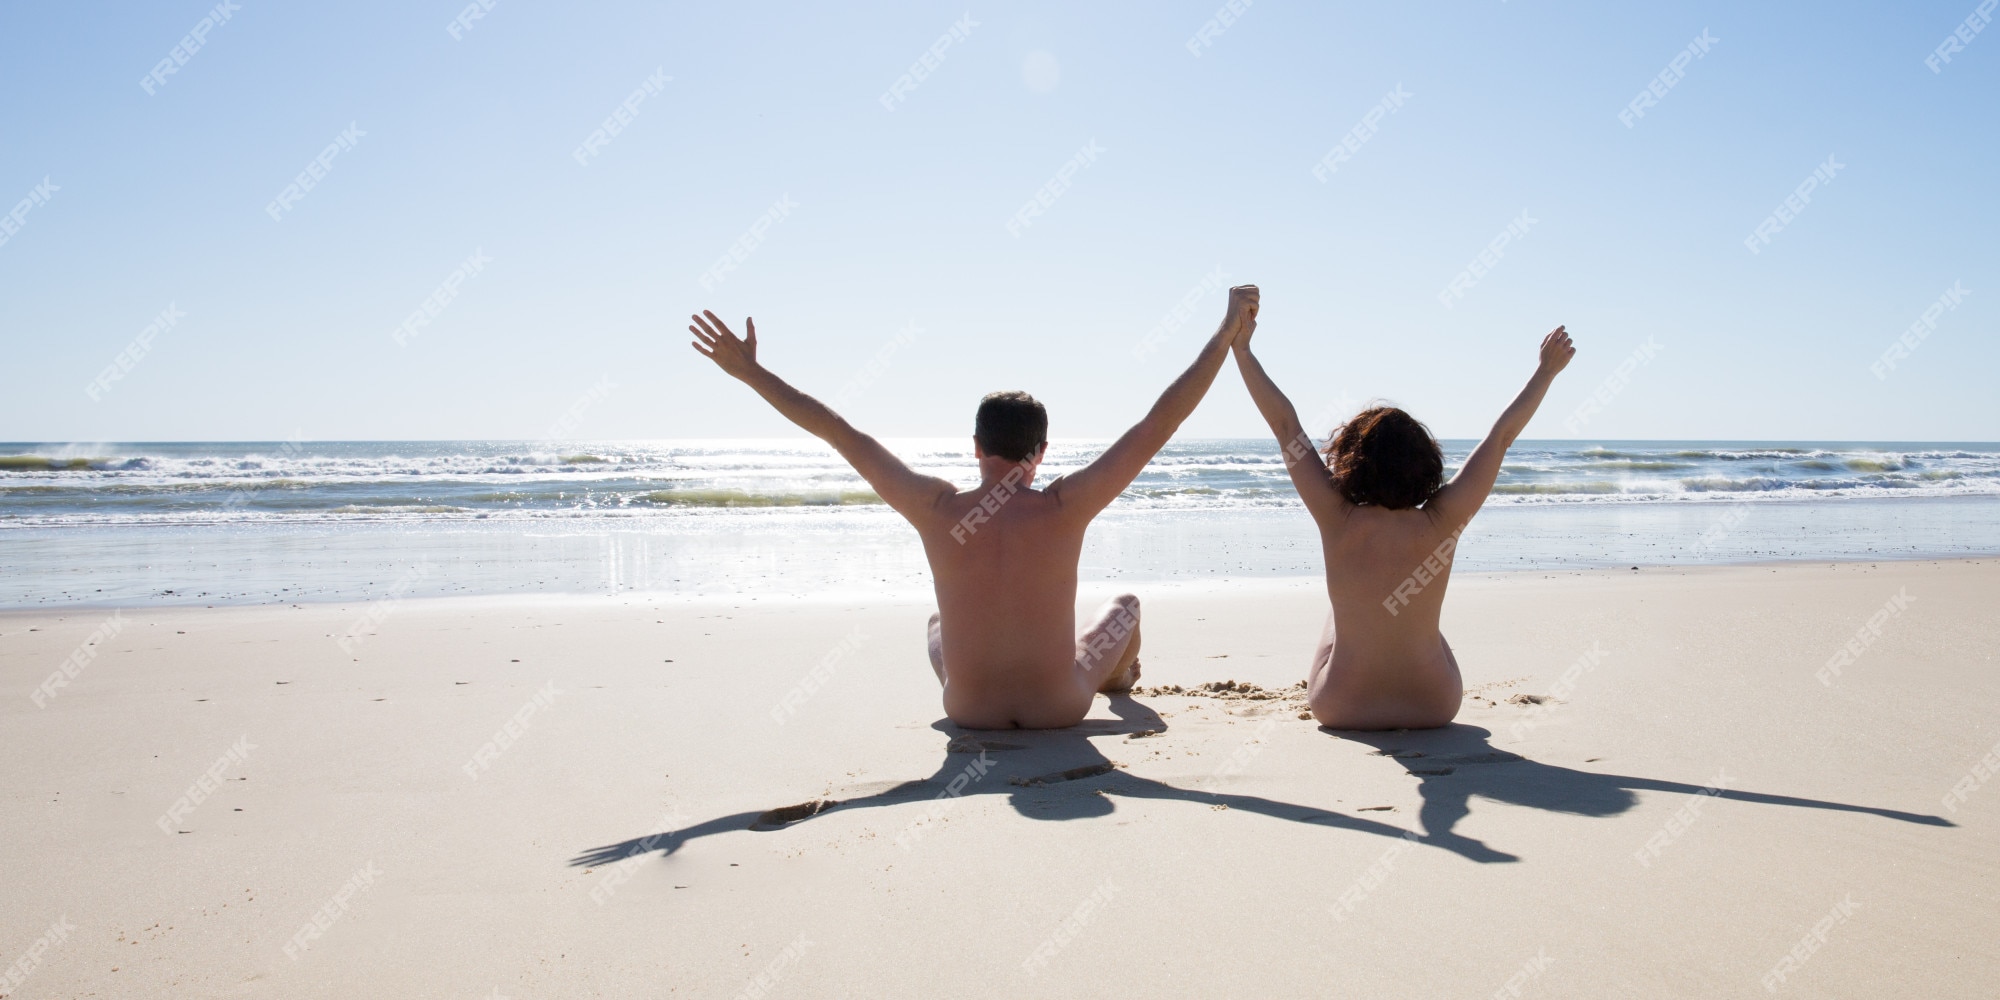 dean tallant recommends young nudist couples pic